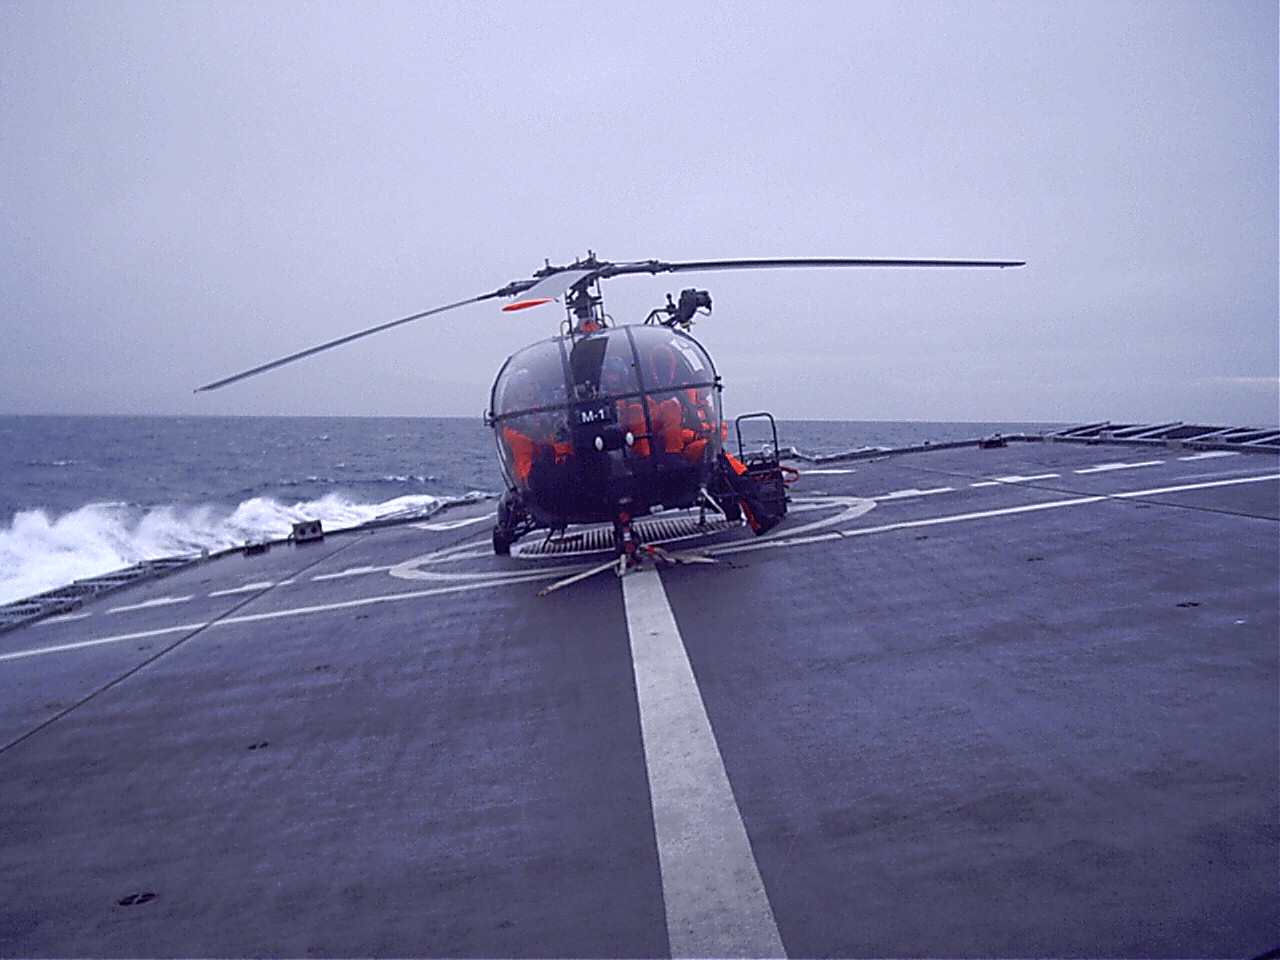 Alouette III - Page 6 1005040814001050245966410